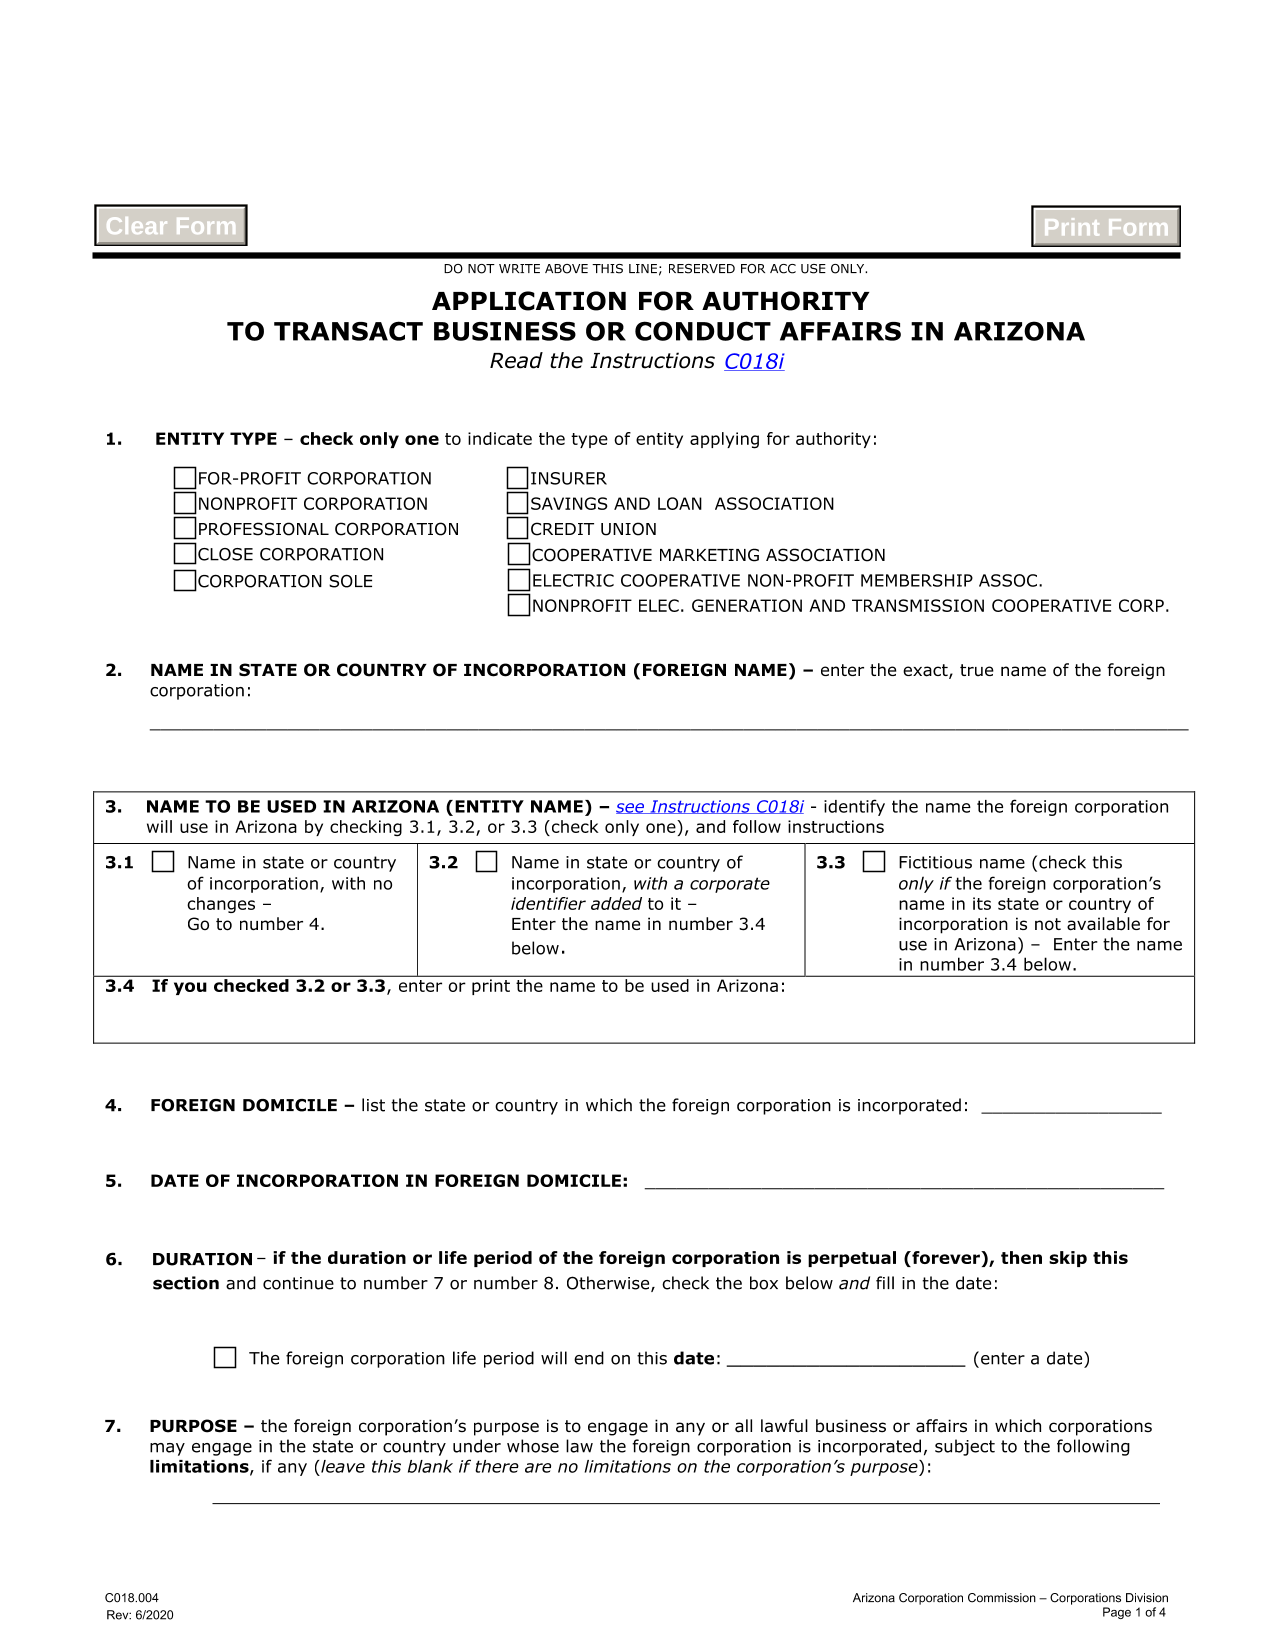 arizona-foreign-corporation-application-for-authority-to-transact-business